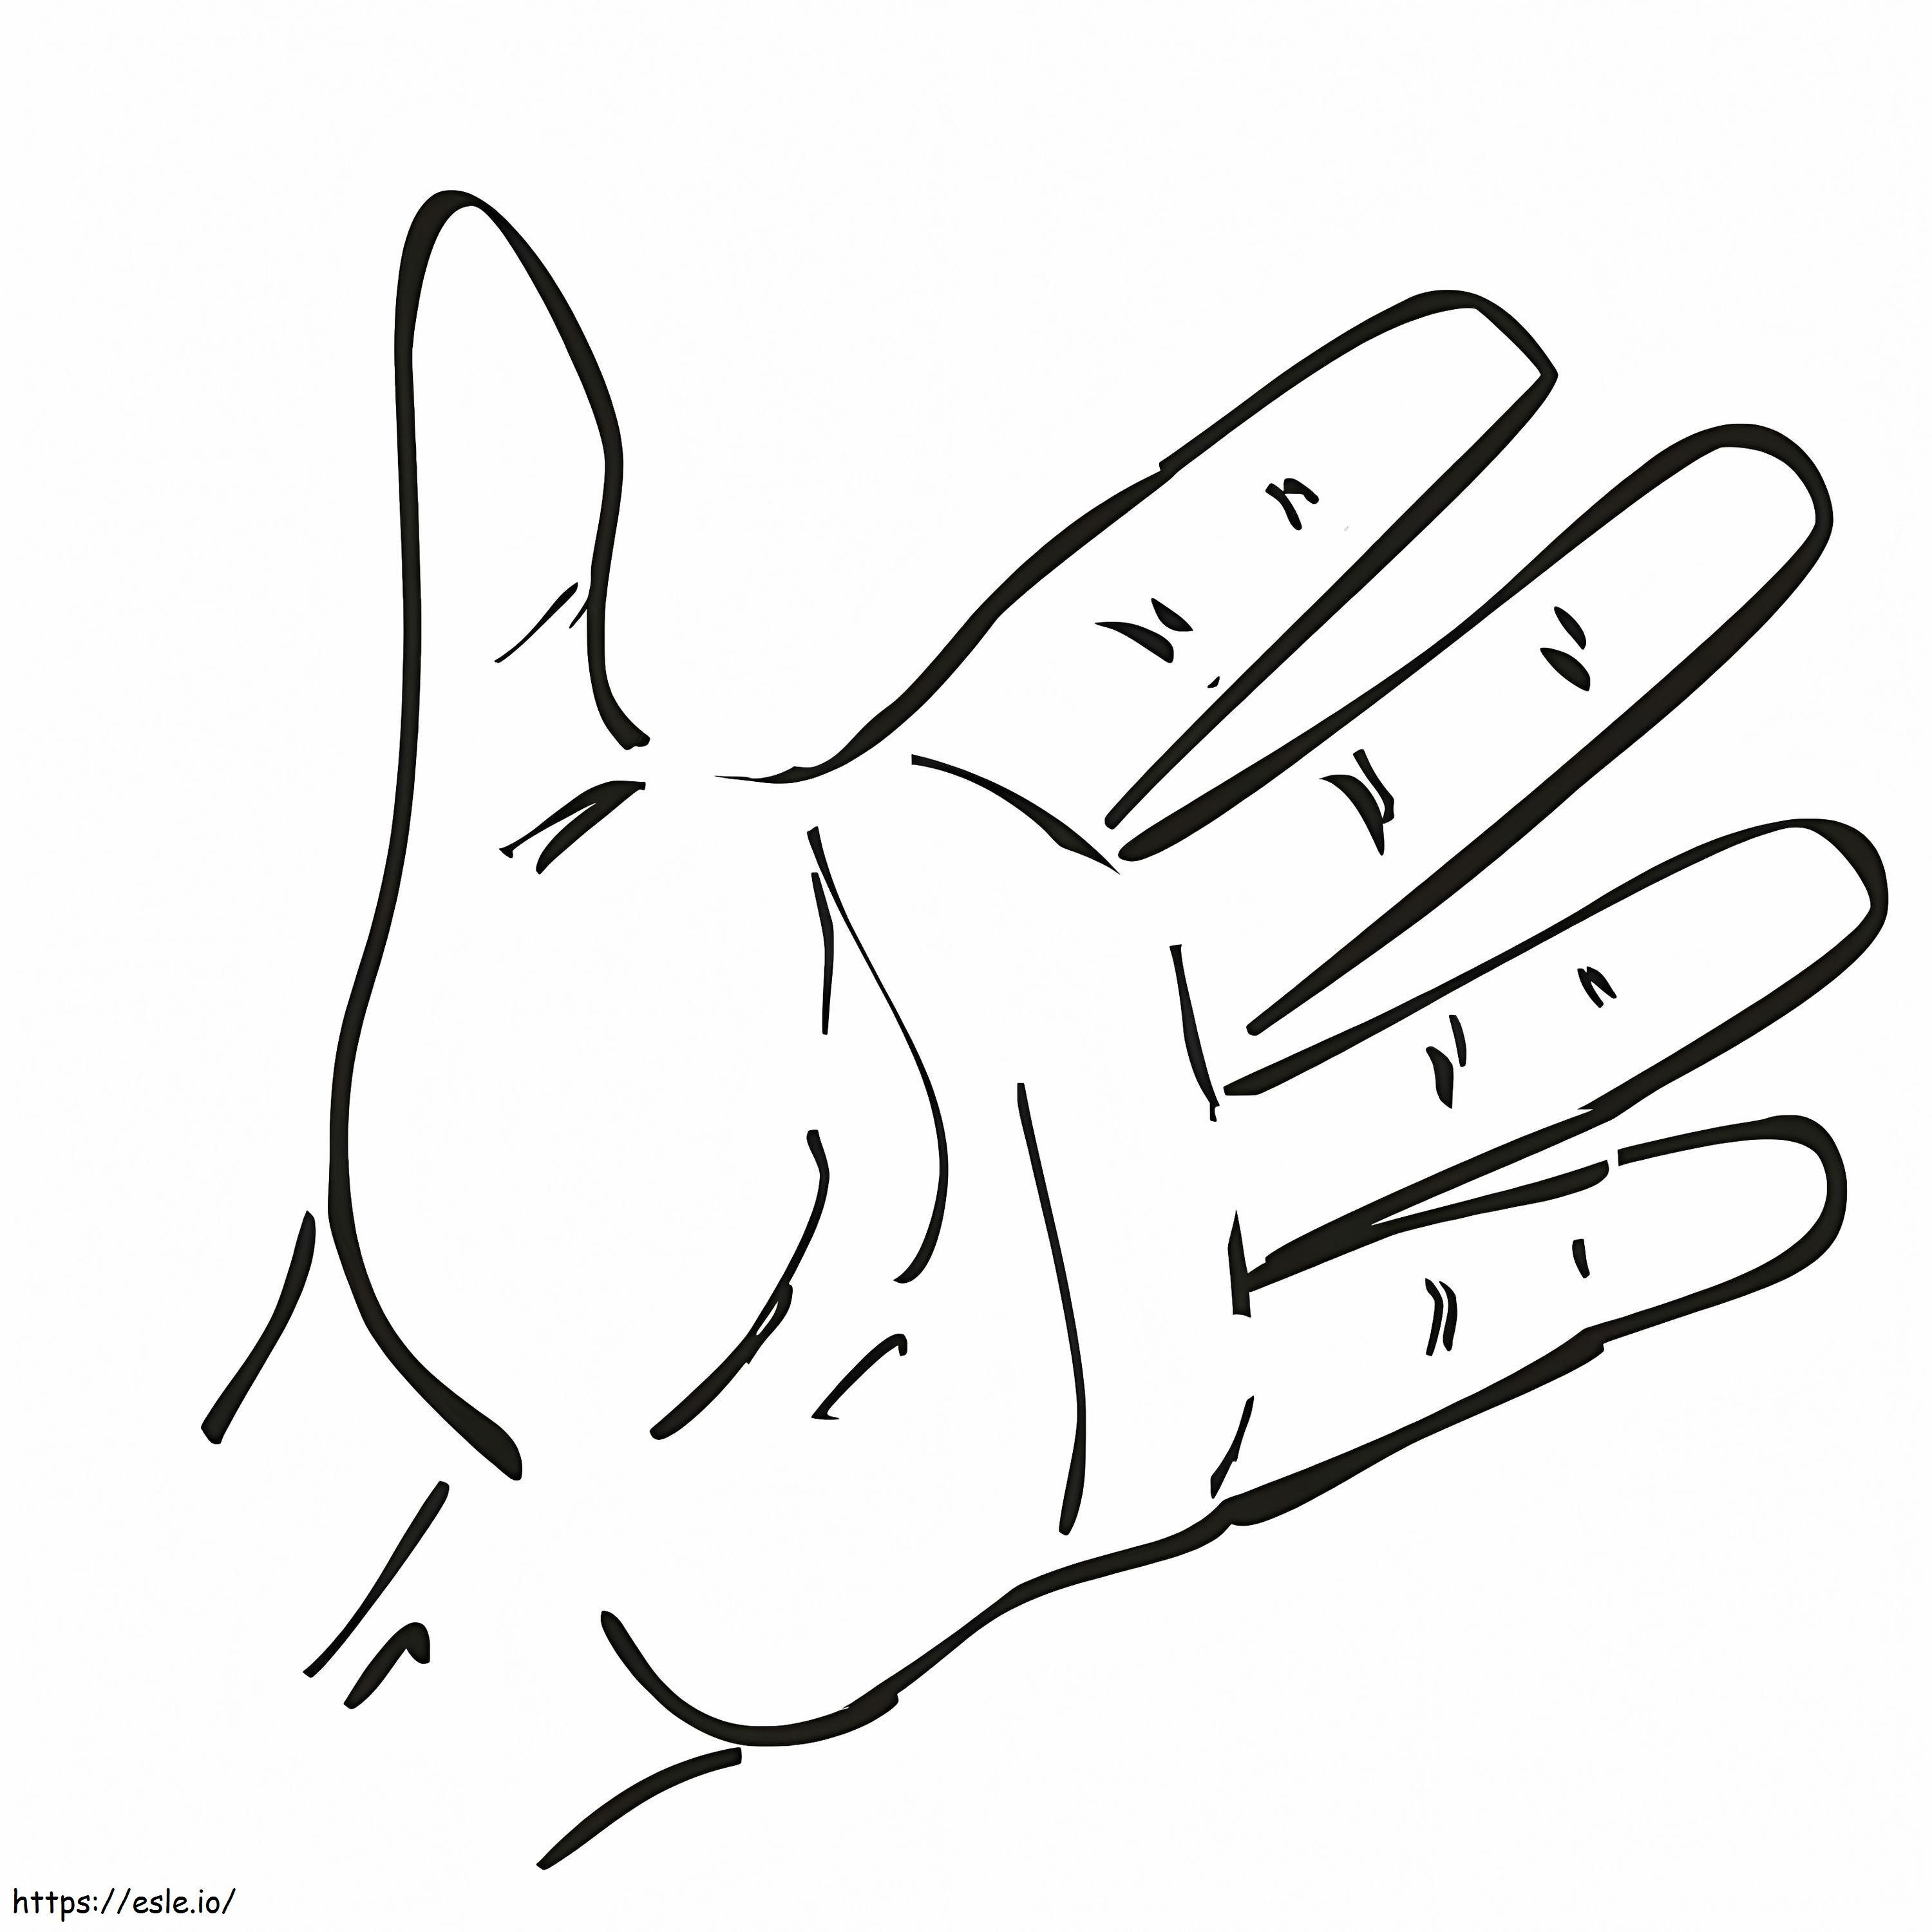 Open Hand coloring page